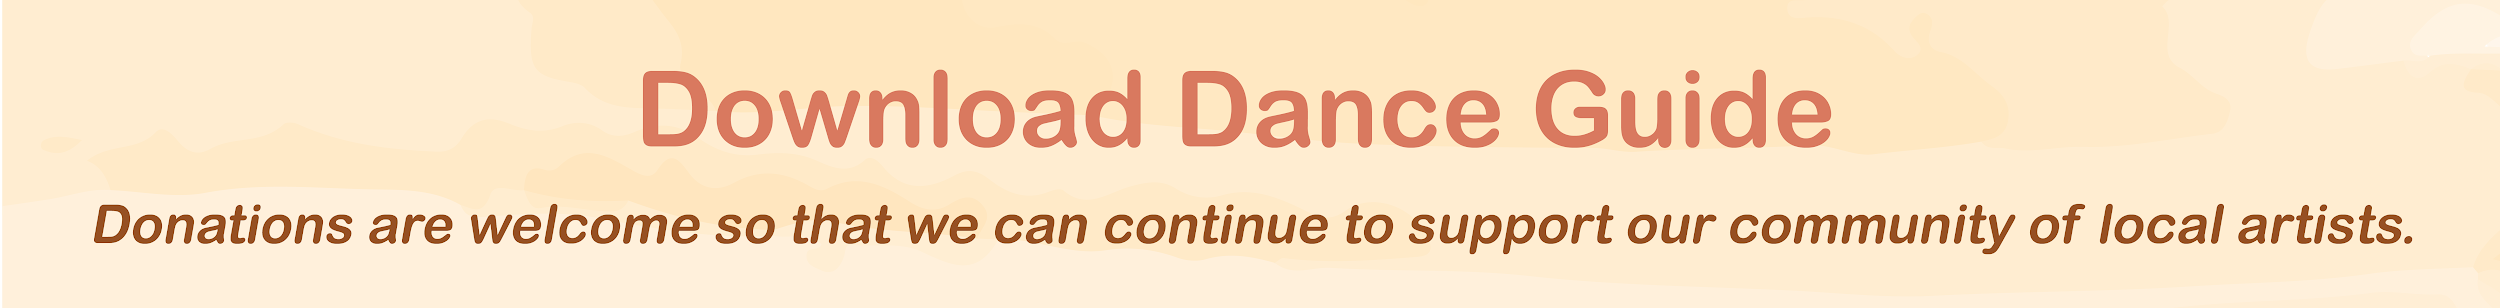 Download Dance Guide.png